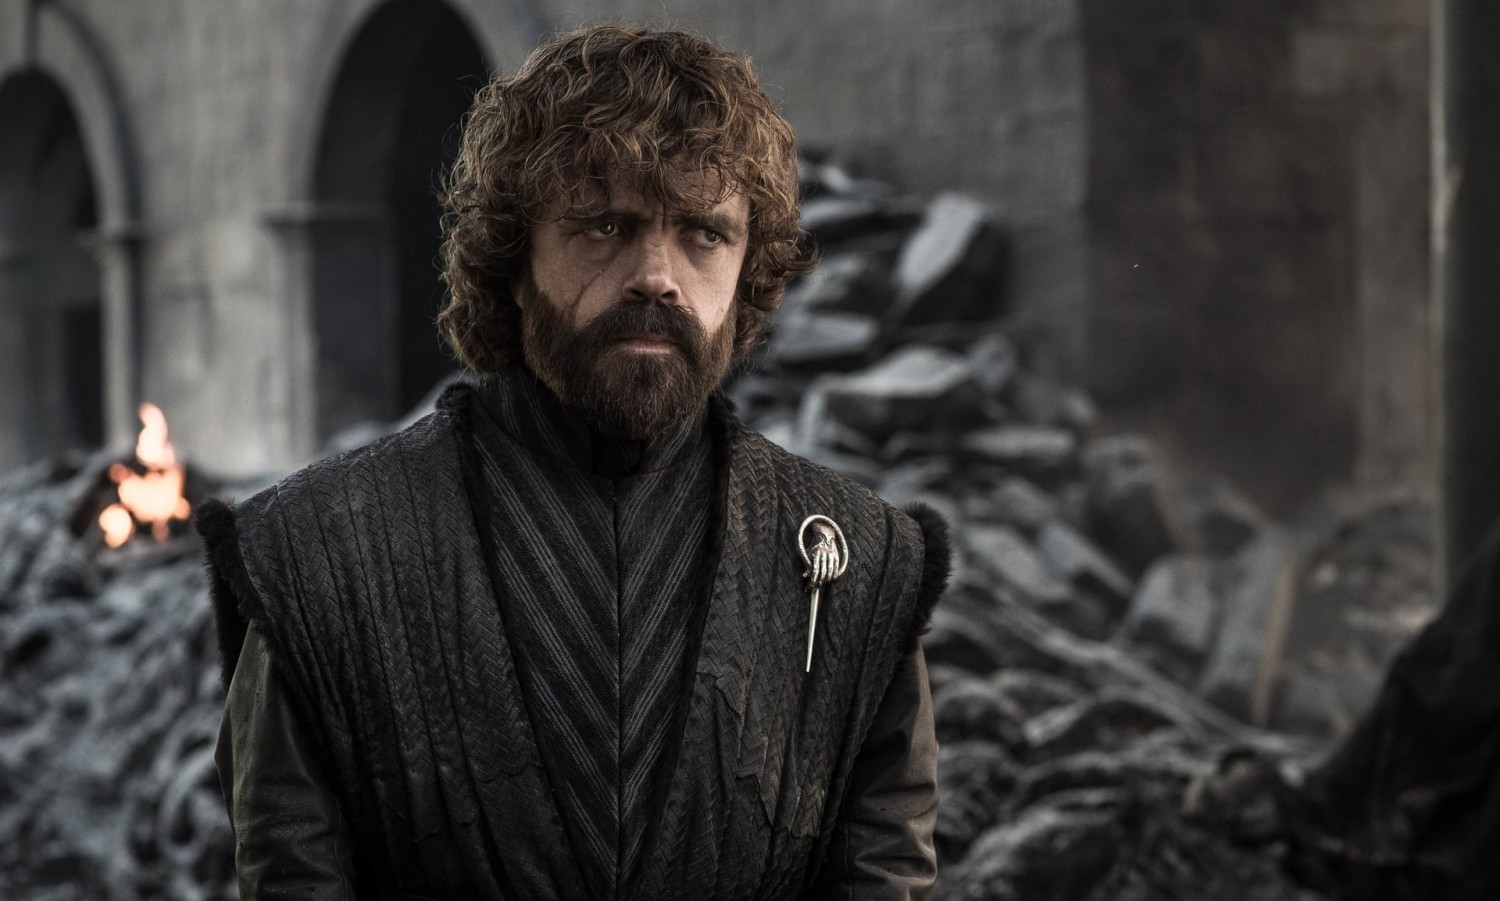  Peter Dinklage in Game of Thrones. Photograph: HBO/Helen Sloan/Courtesy of HBO